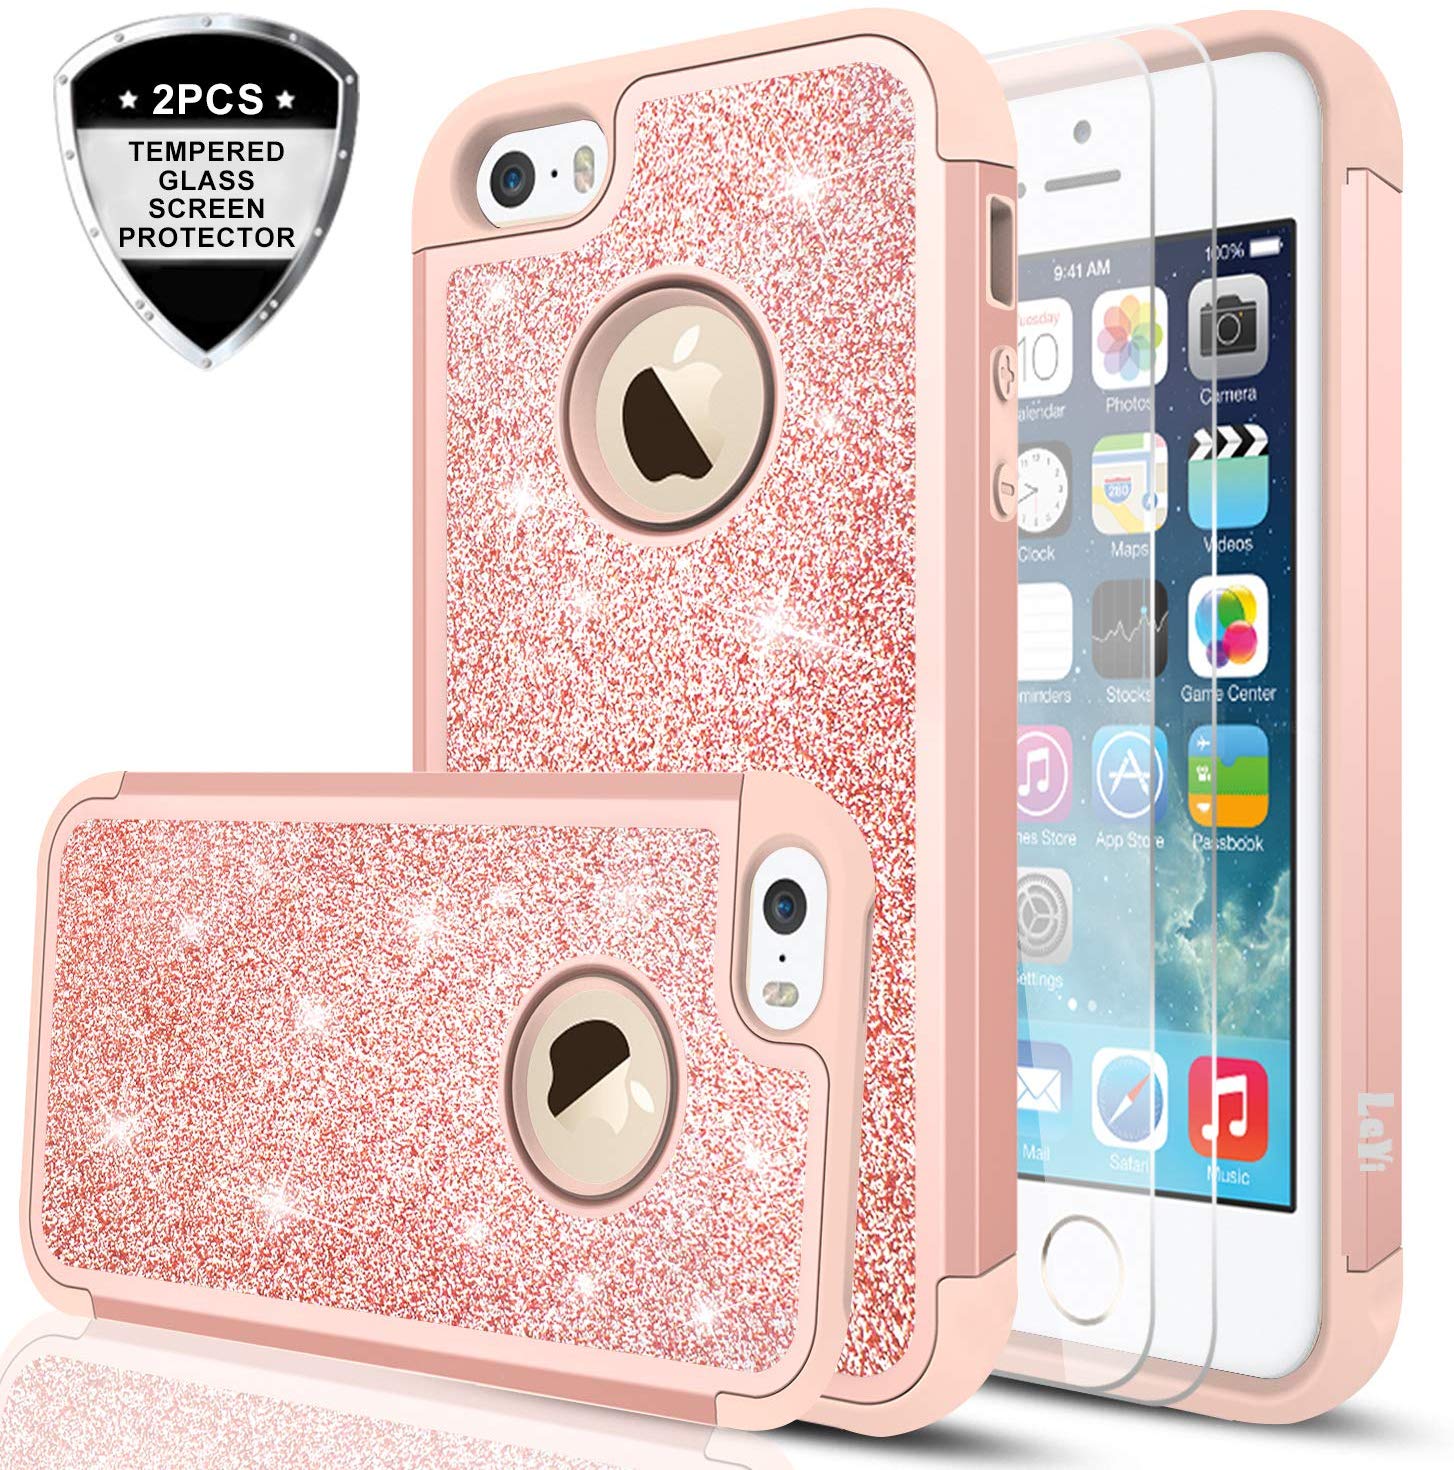 Iphone 5s Case Iphone 5 Iphone Se Case With Tempered Glass Screen Pro Leyicase